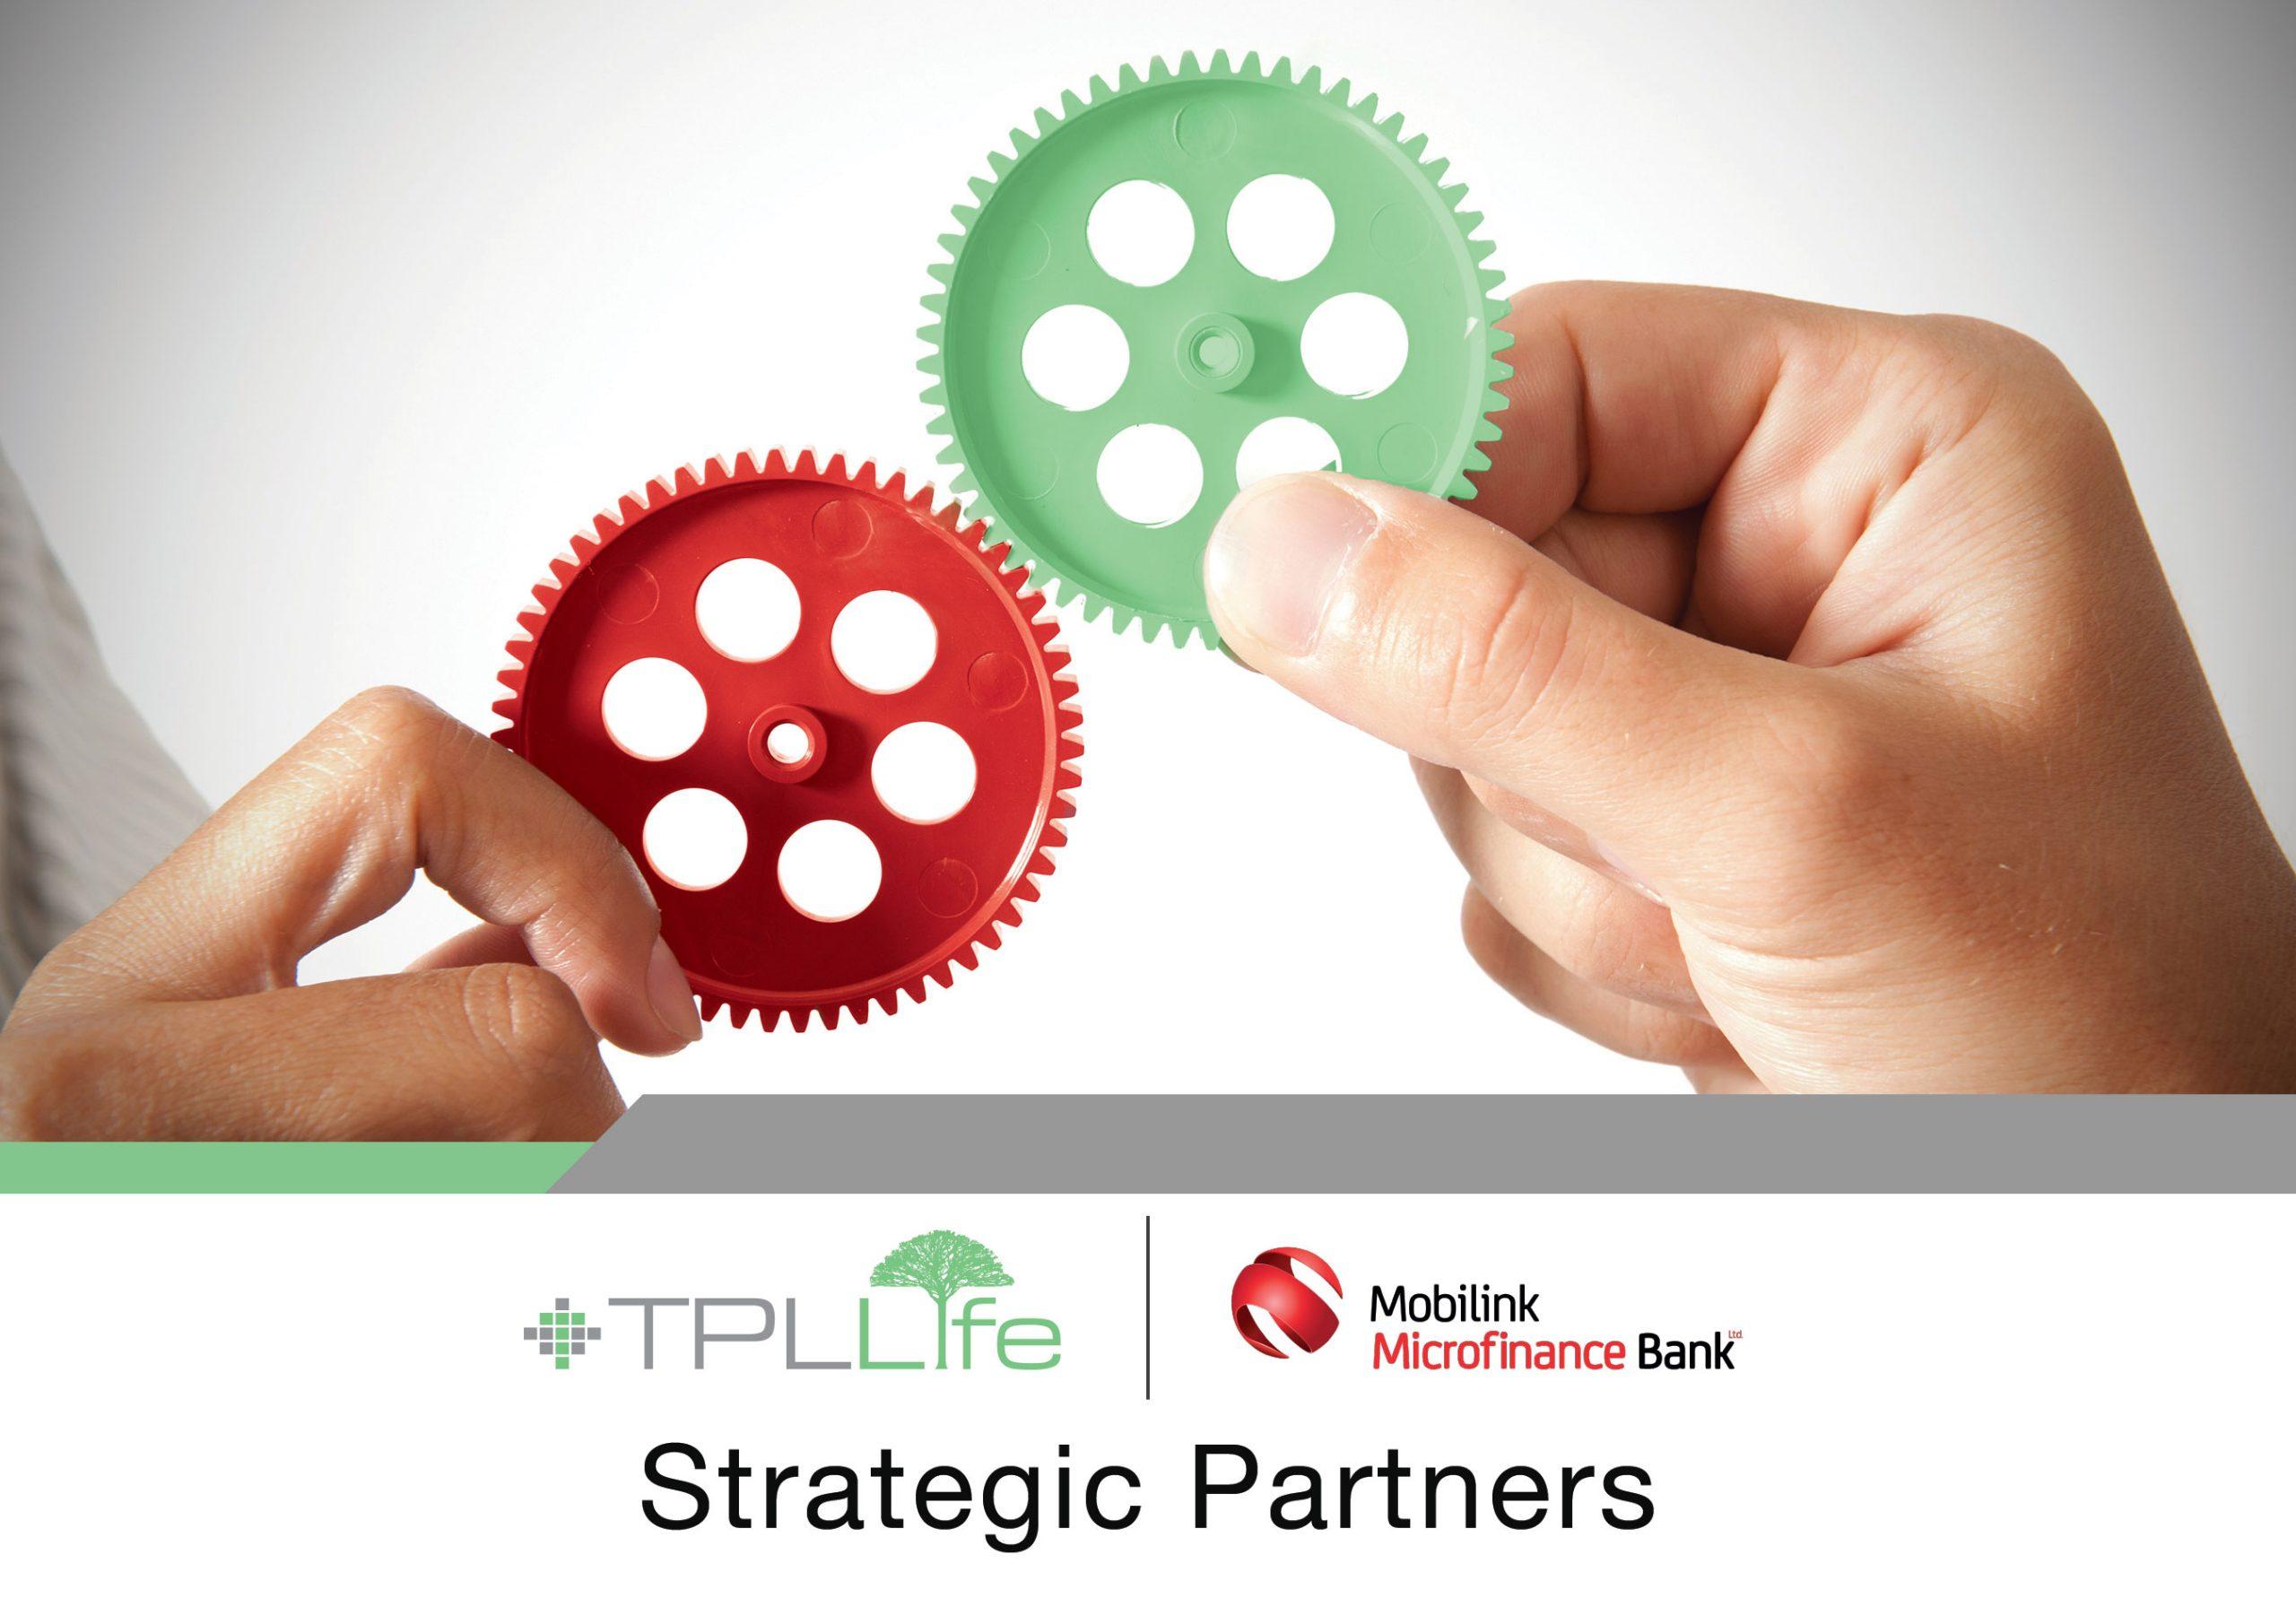 TPL Life and Mobilink Microfinance Bank Ltd. Partner to Provide Protection against COVID-19